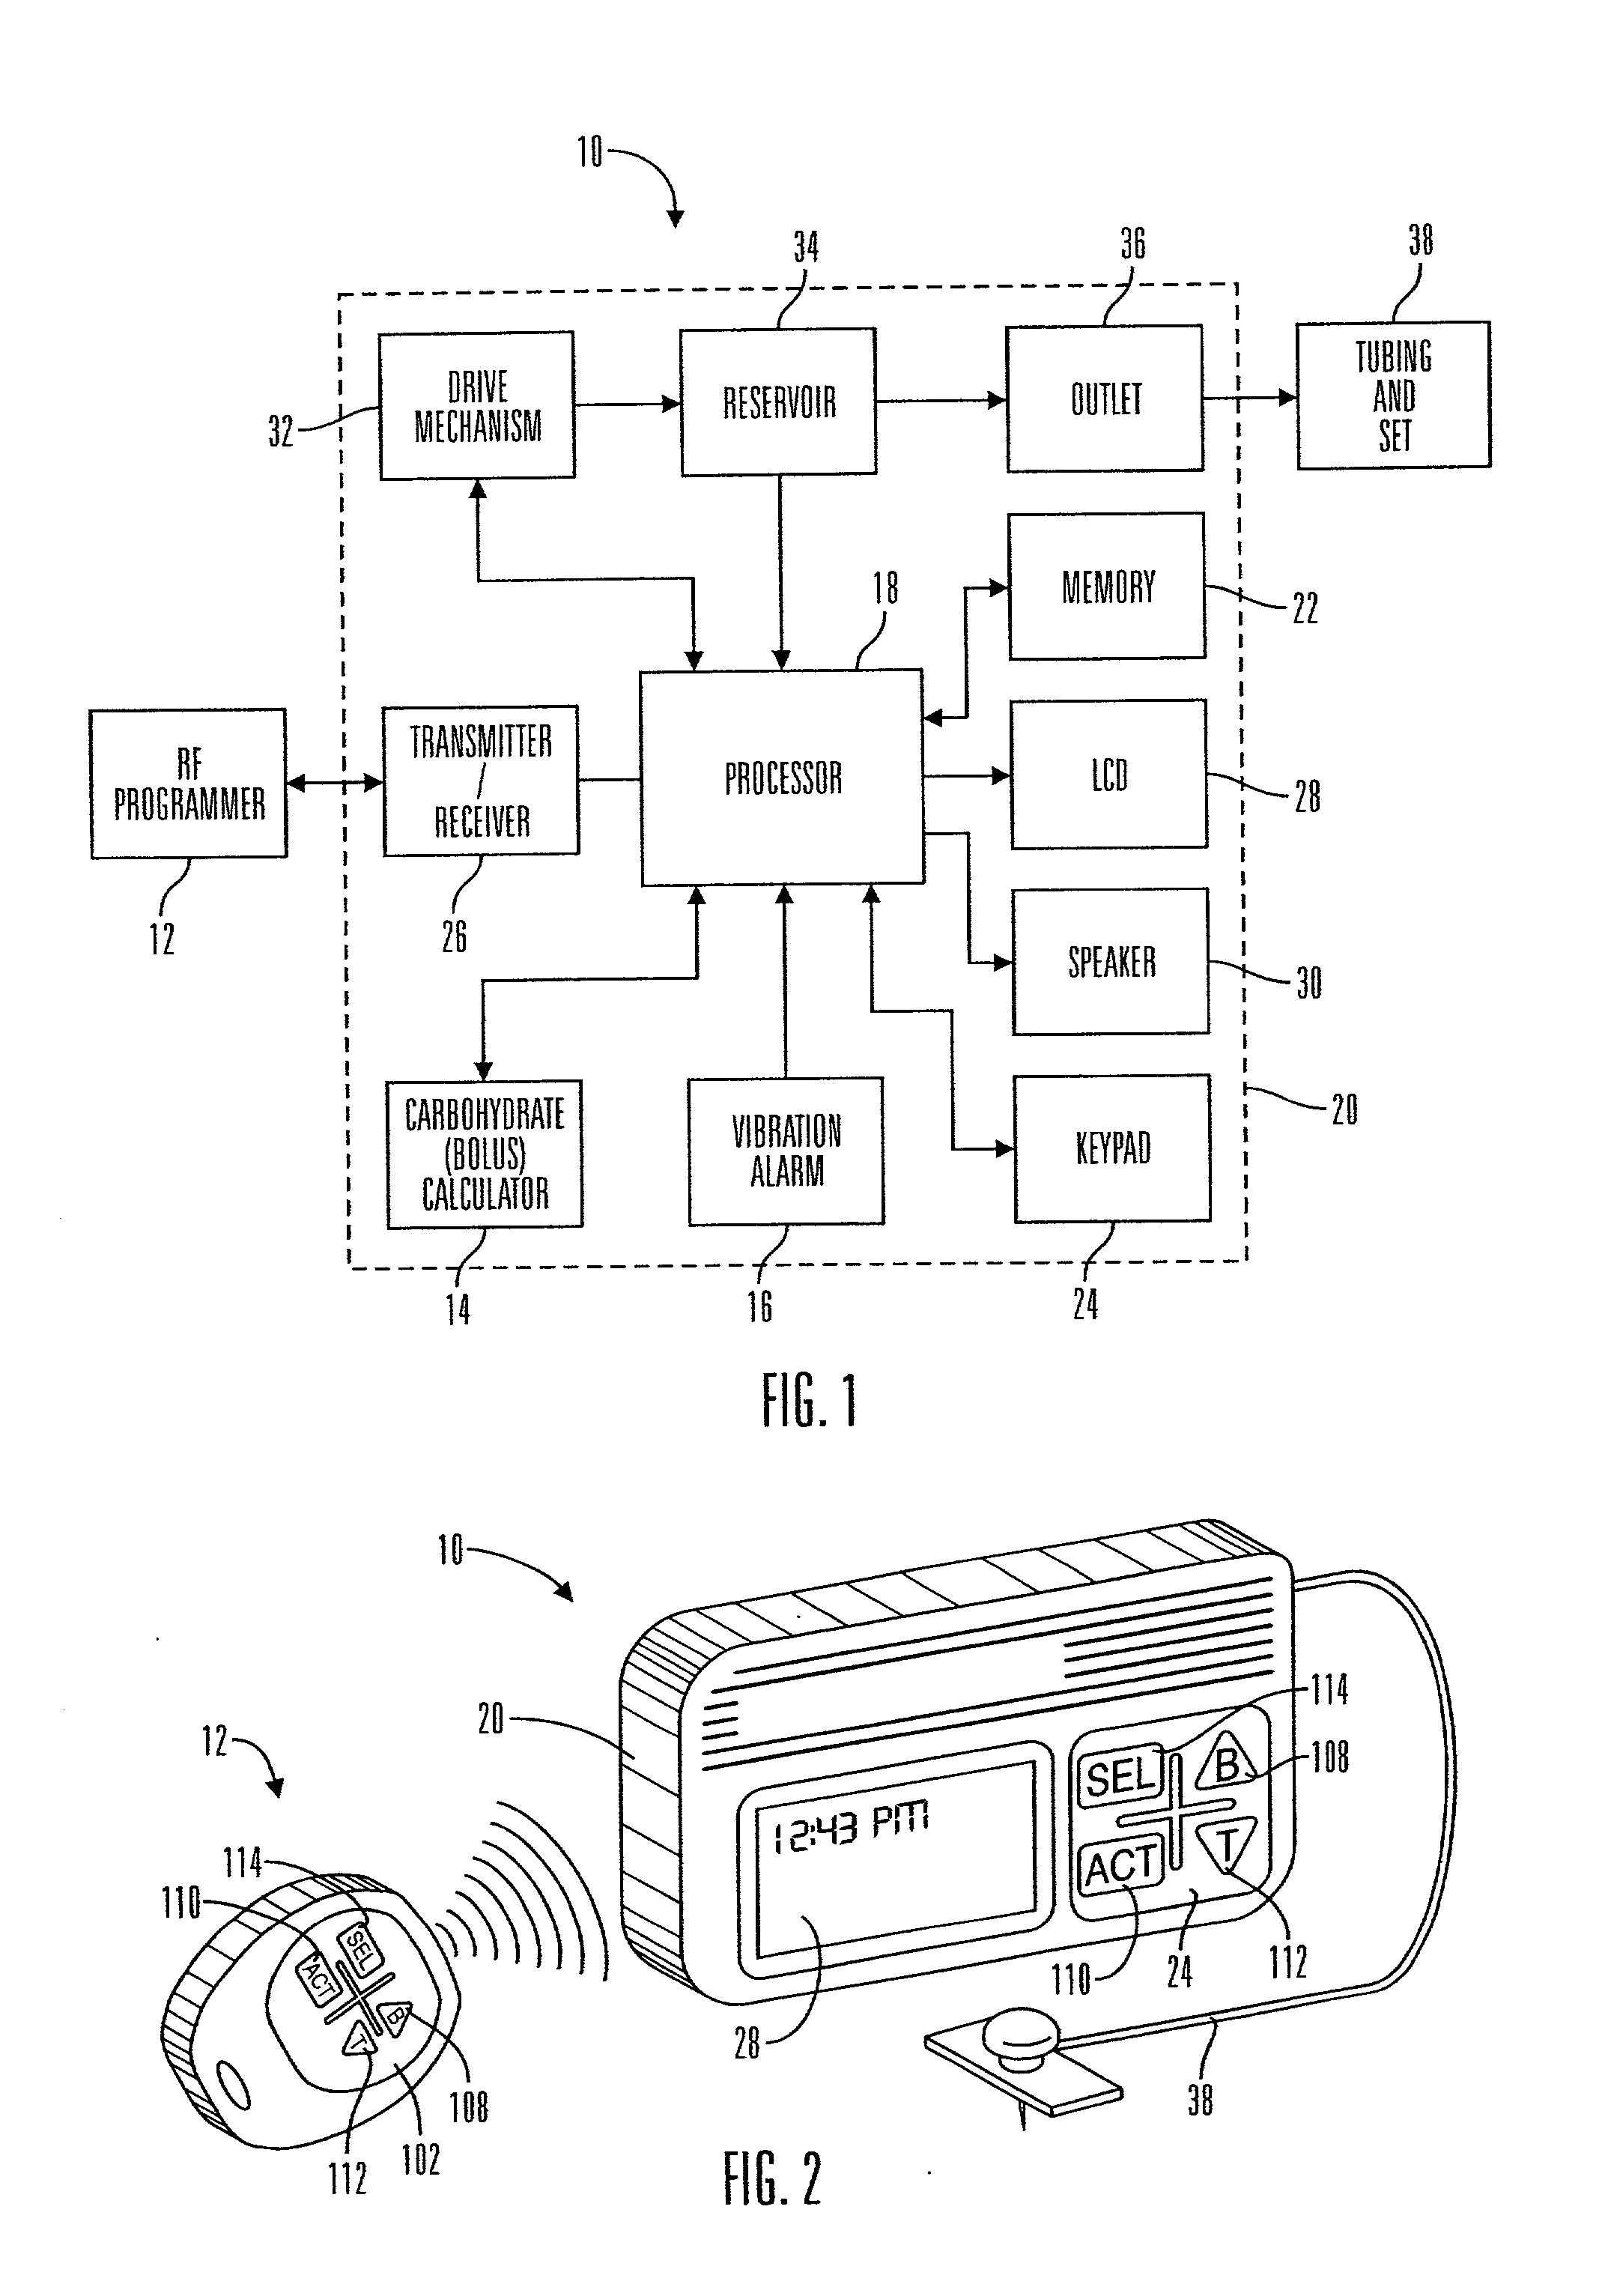 External infusion device with remote programming, bolus estimator and/or vibration alarm capabilities